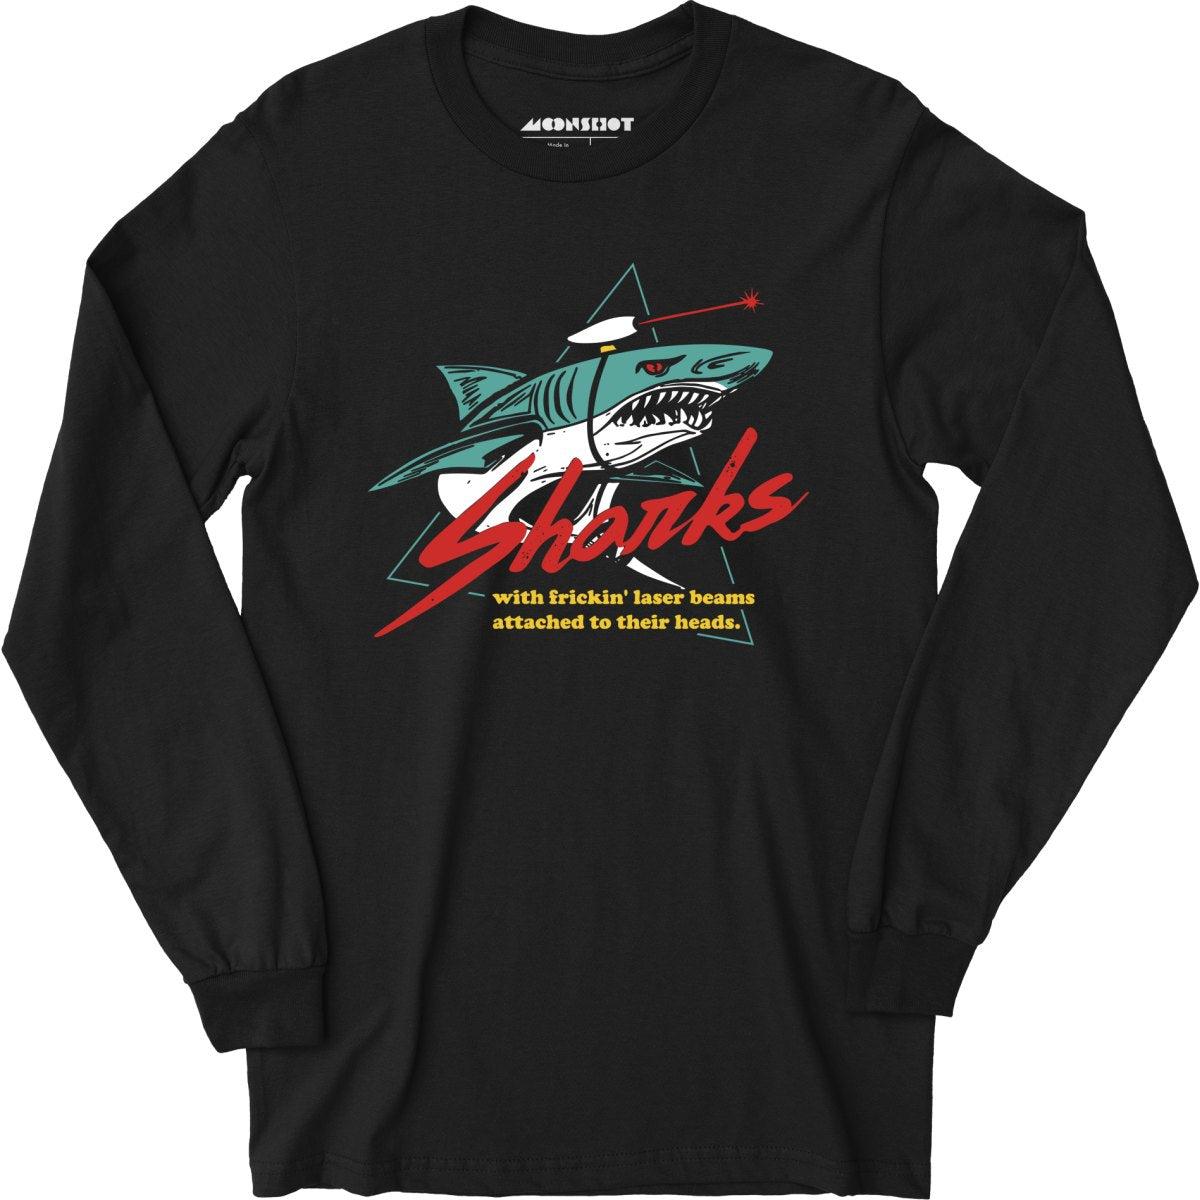 Sharks With Frickin' Laser Beams Attached to Their Heads - Long Sleeve T-Shirt